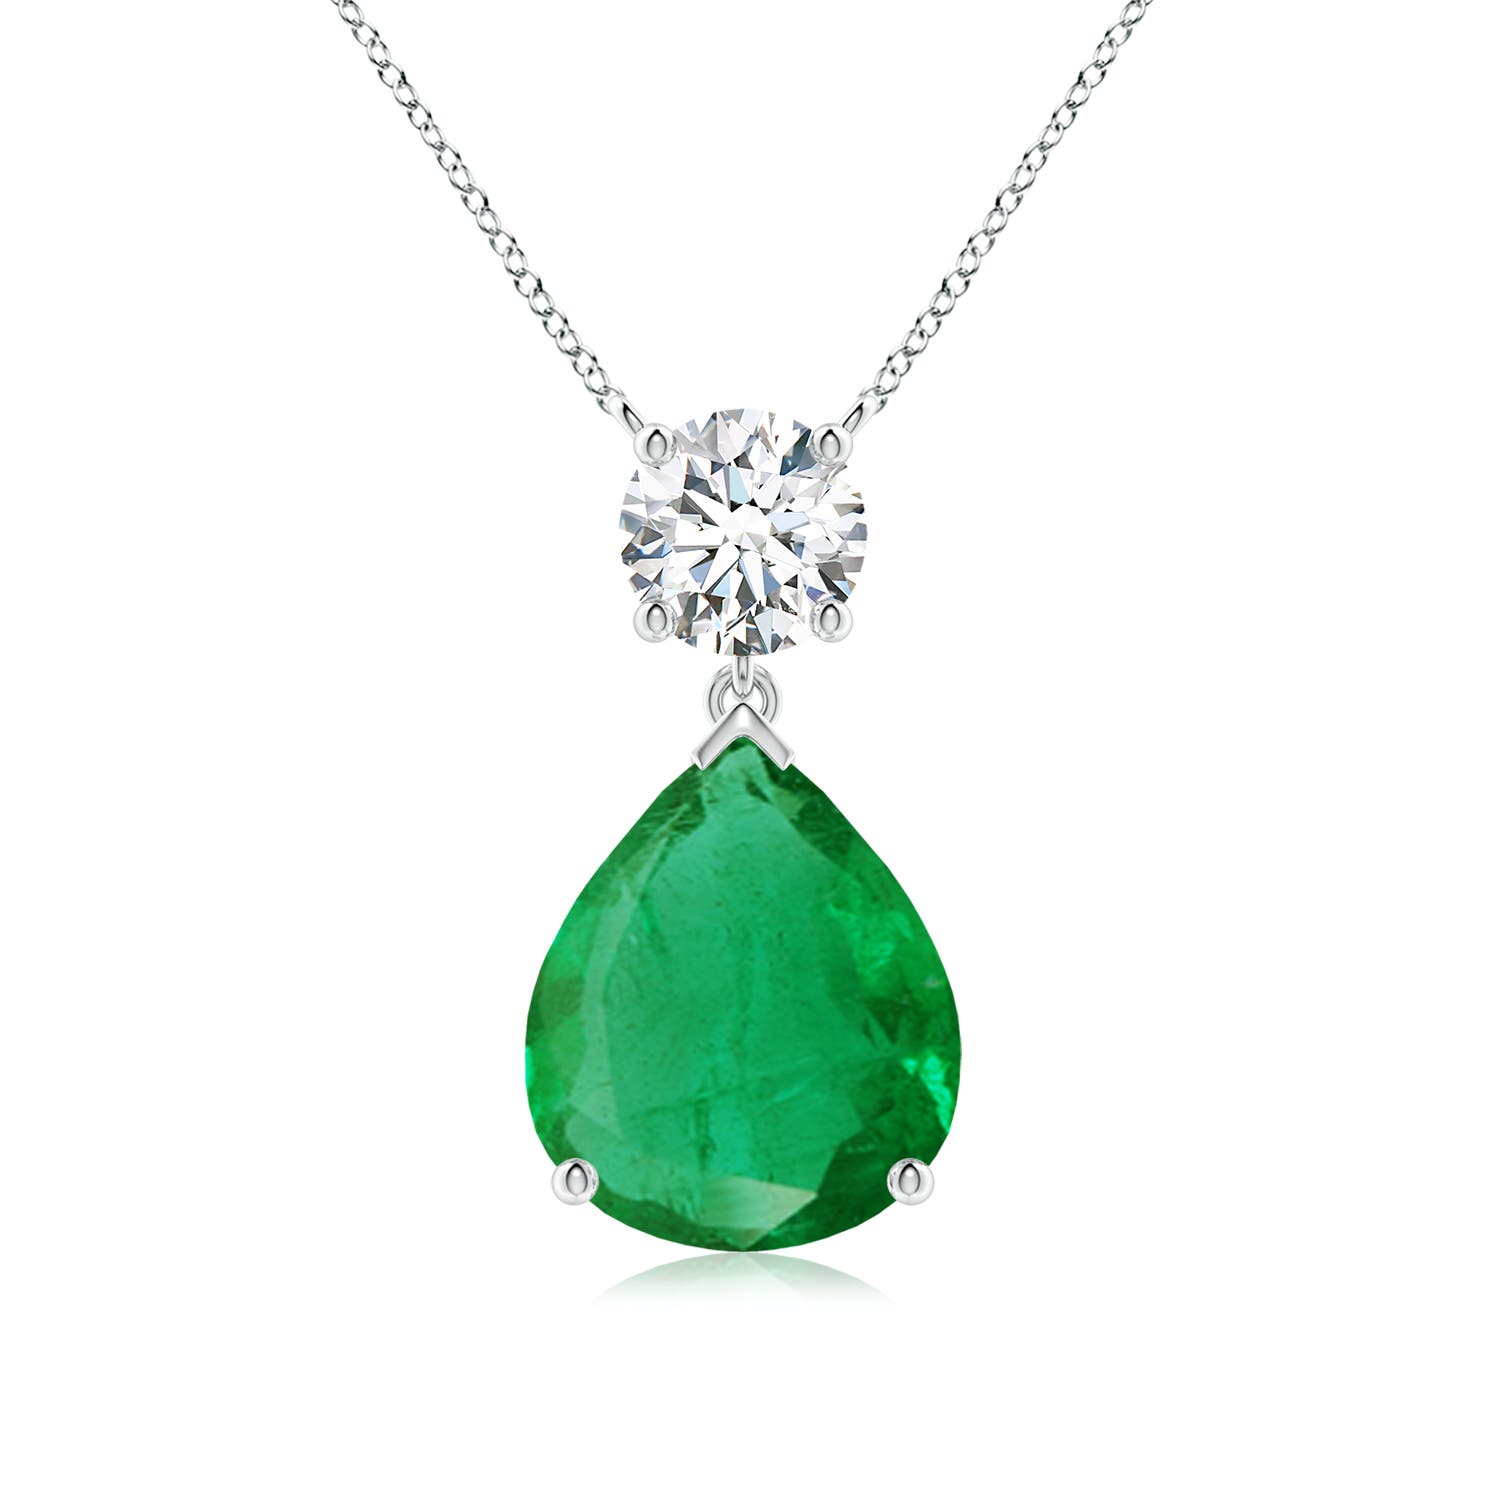 AA - Emerald / 5.21 CT / 14 KT White Gold